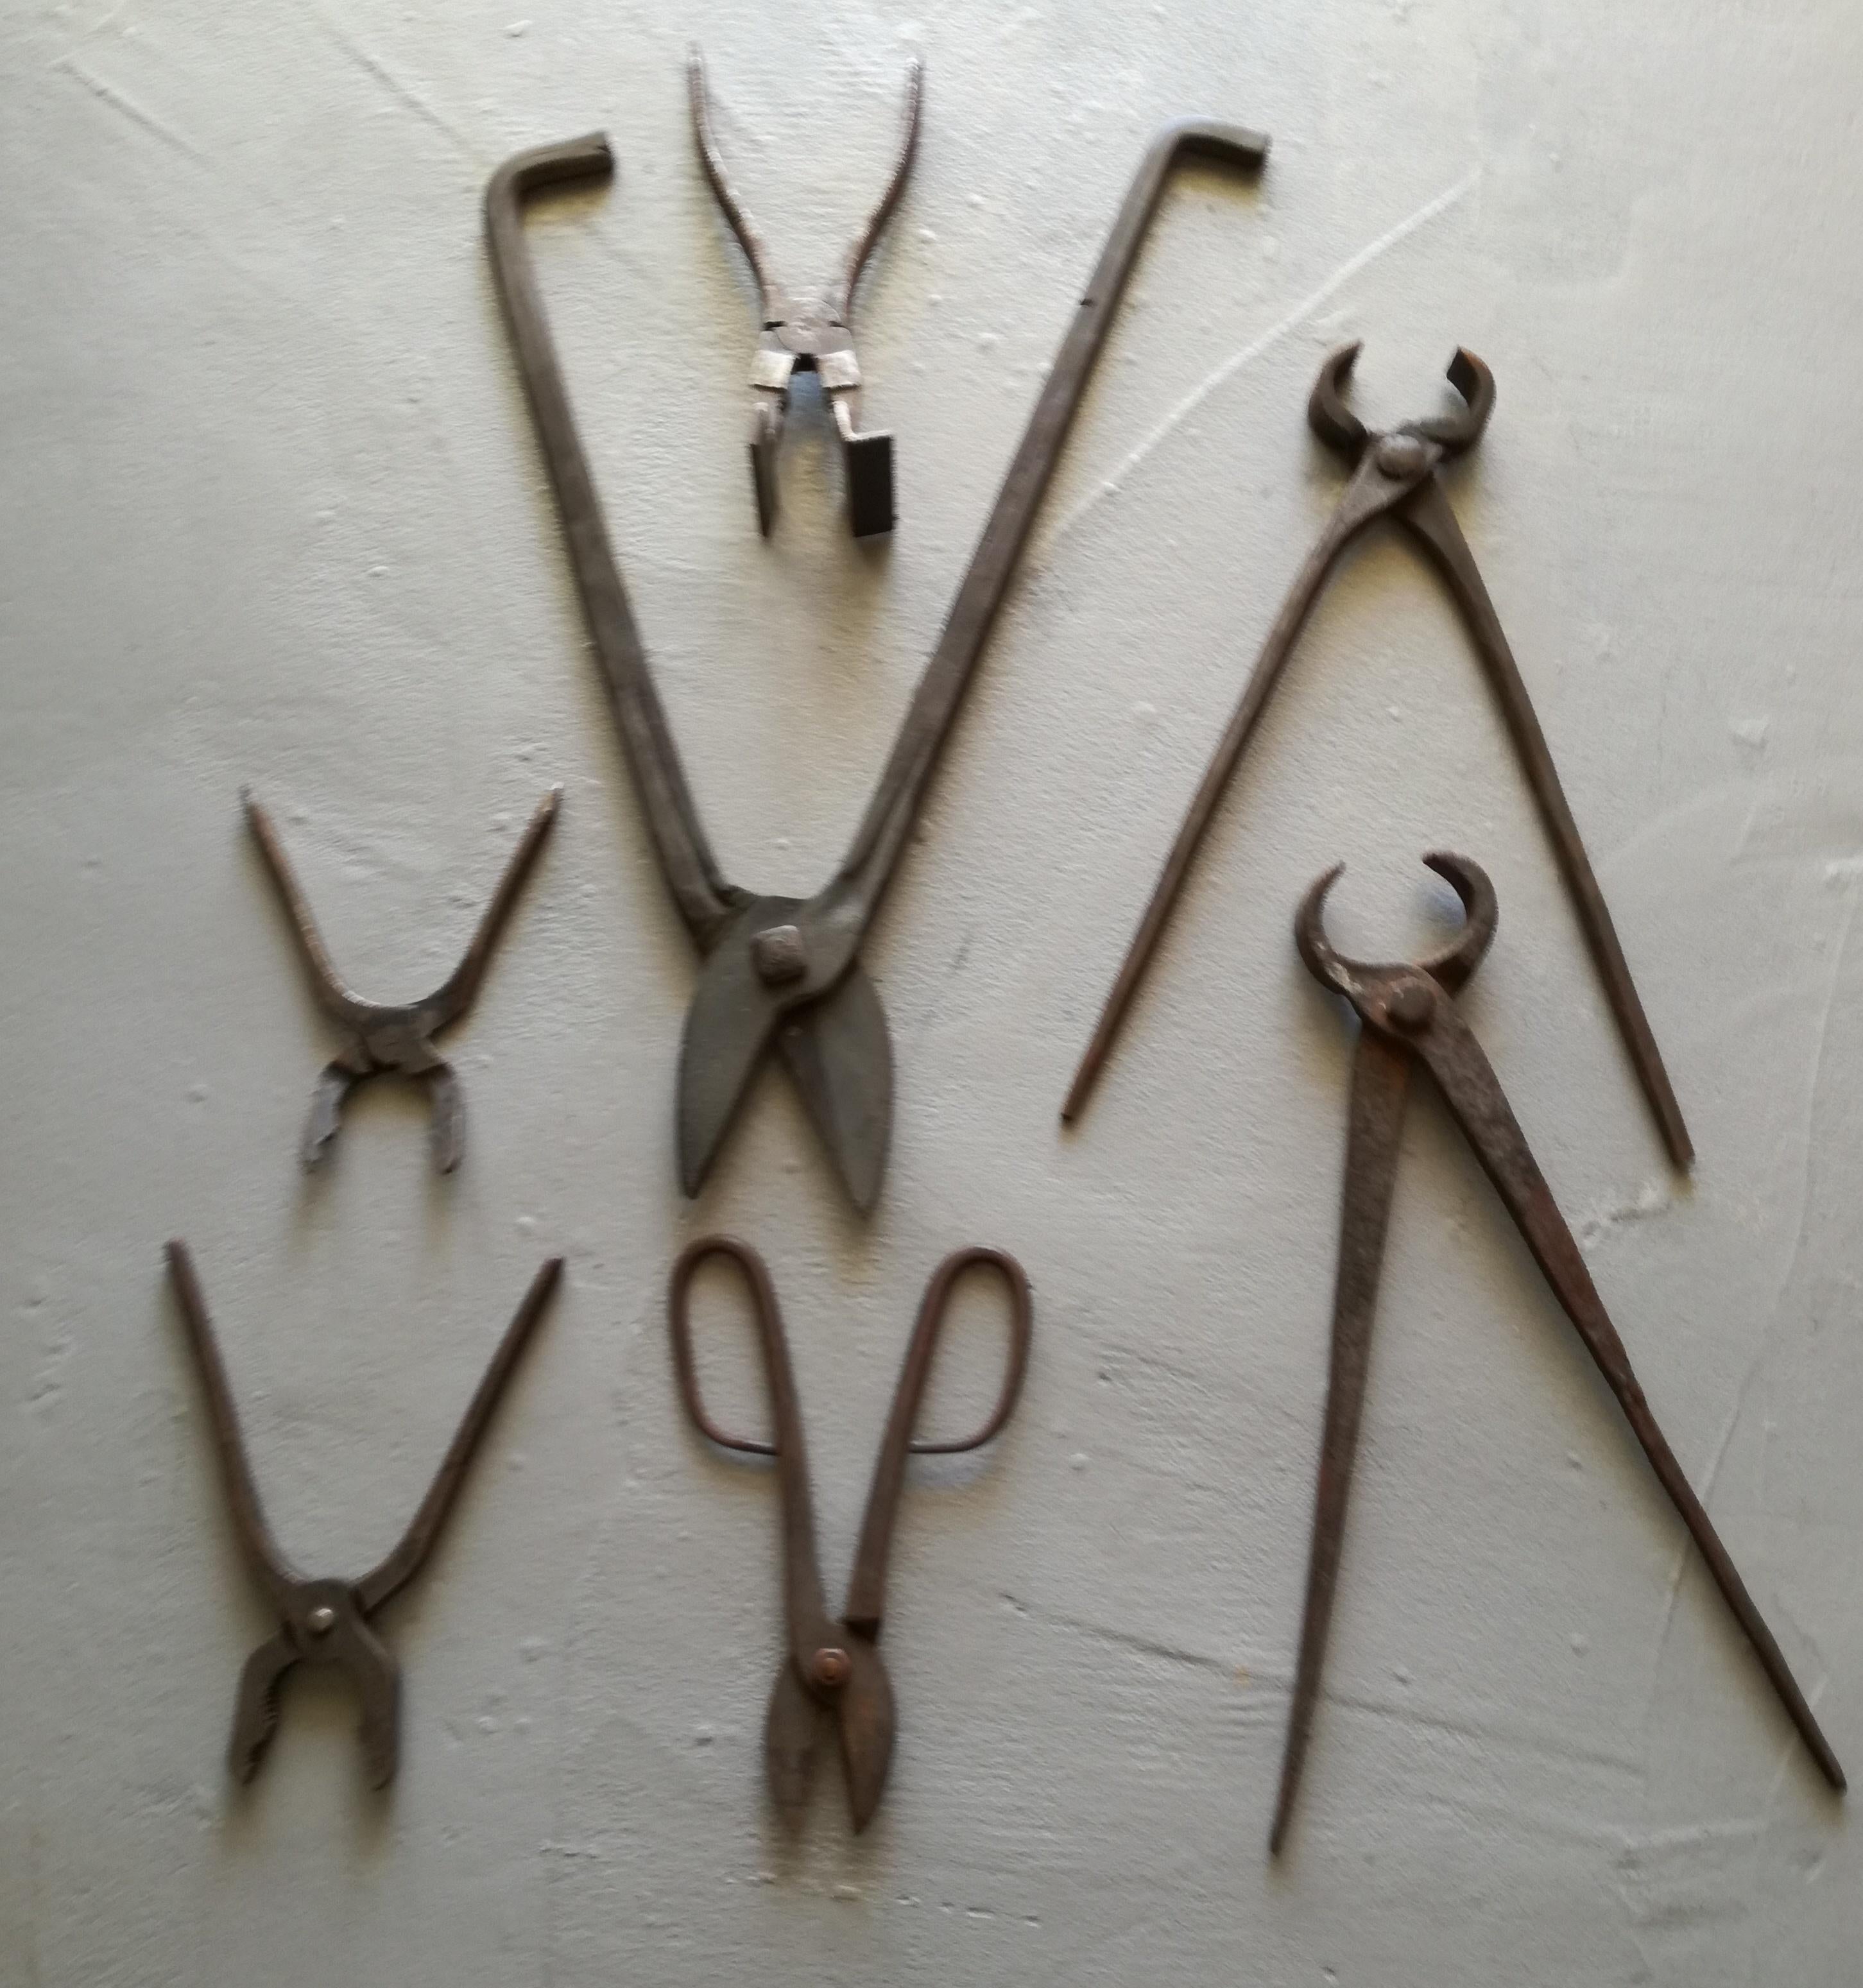 Set of seven metal forging tools (shears and tongs) from a blacksmith's workshop, 1940s-1950s. Various types and sizes. Measurements given refer to the largest tool. Good condition: there is some rust but all are usable.